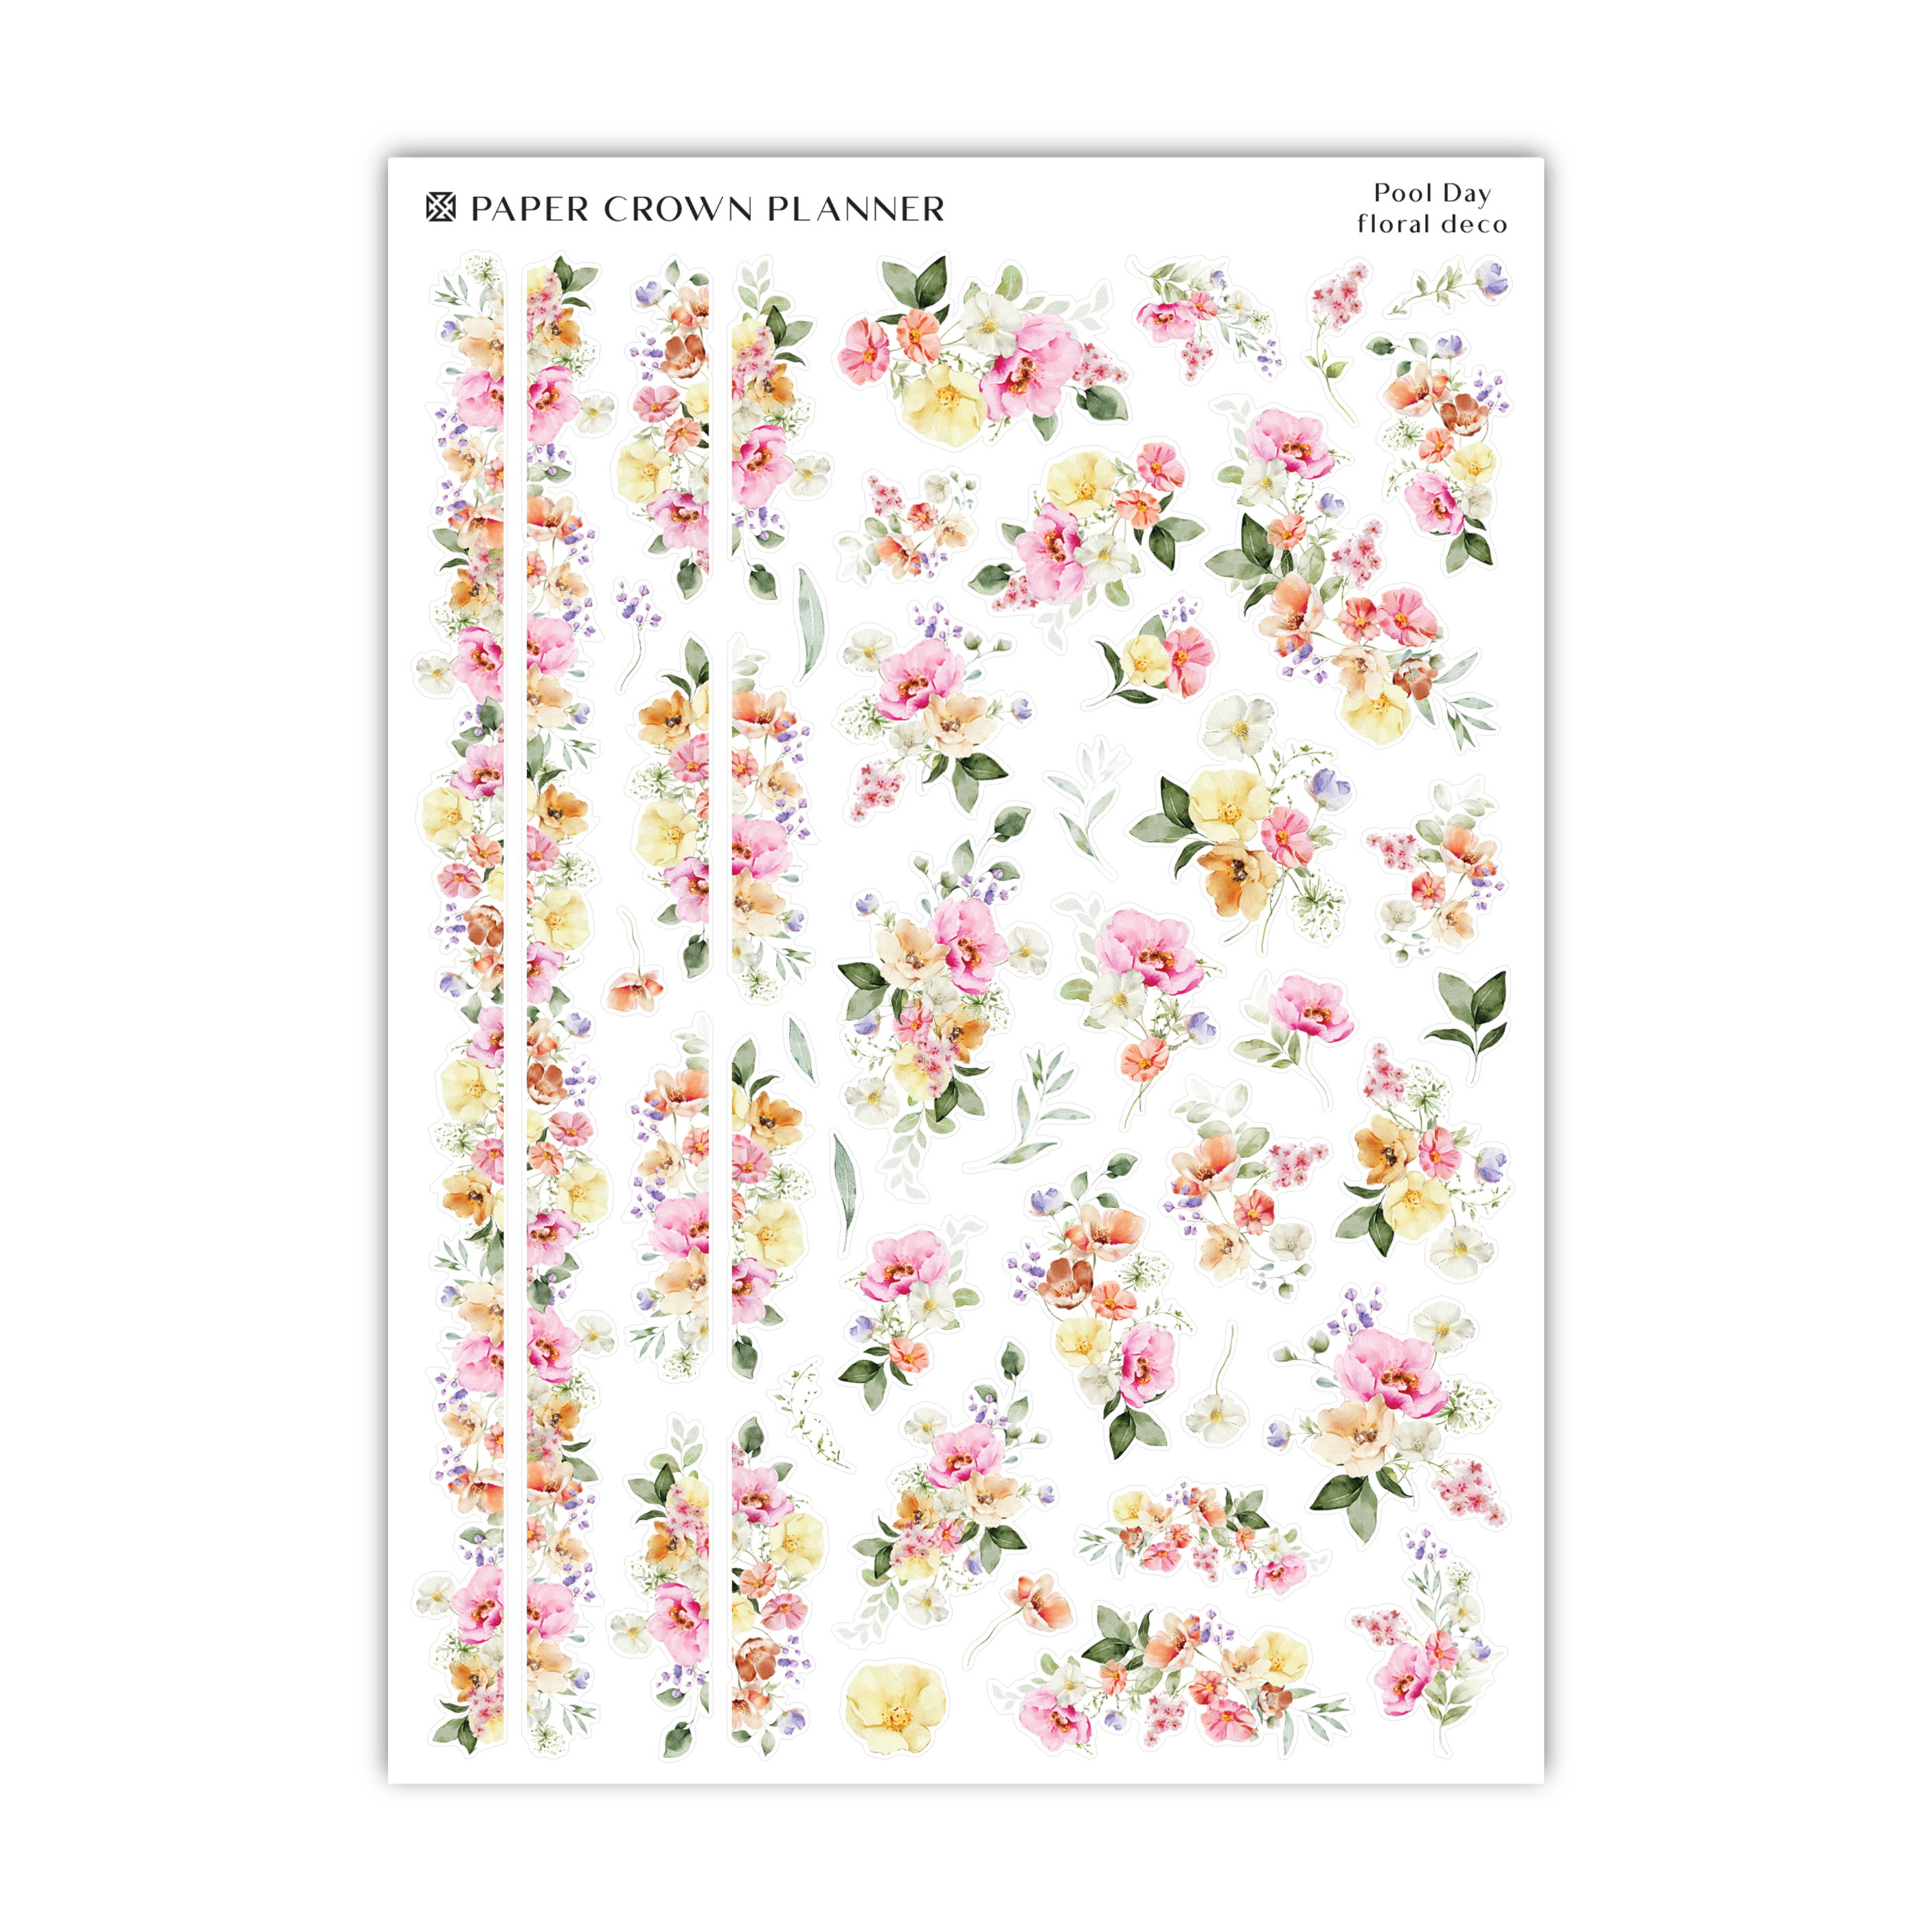 a sheet of paper with flowers on it